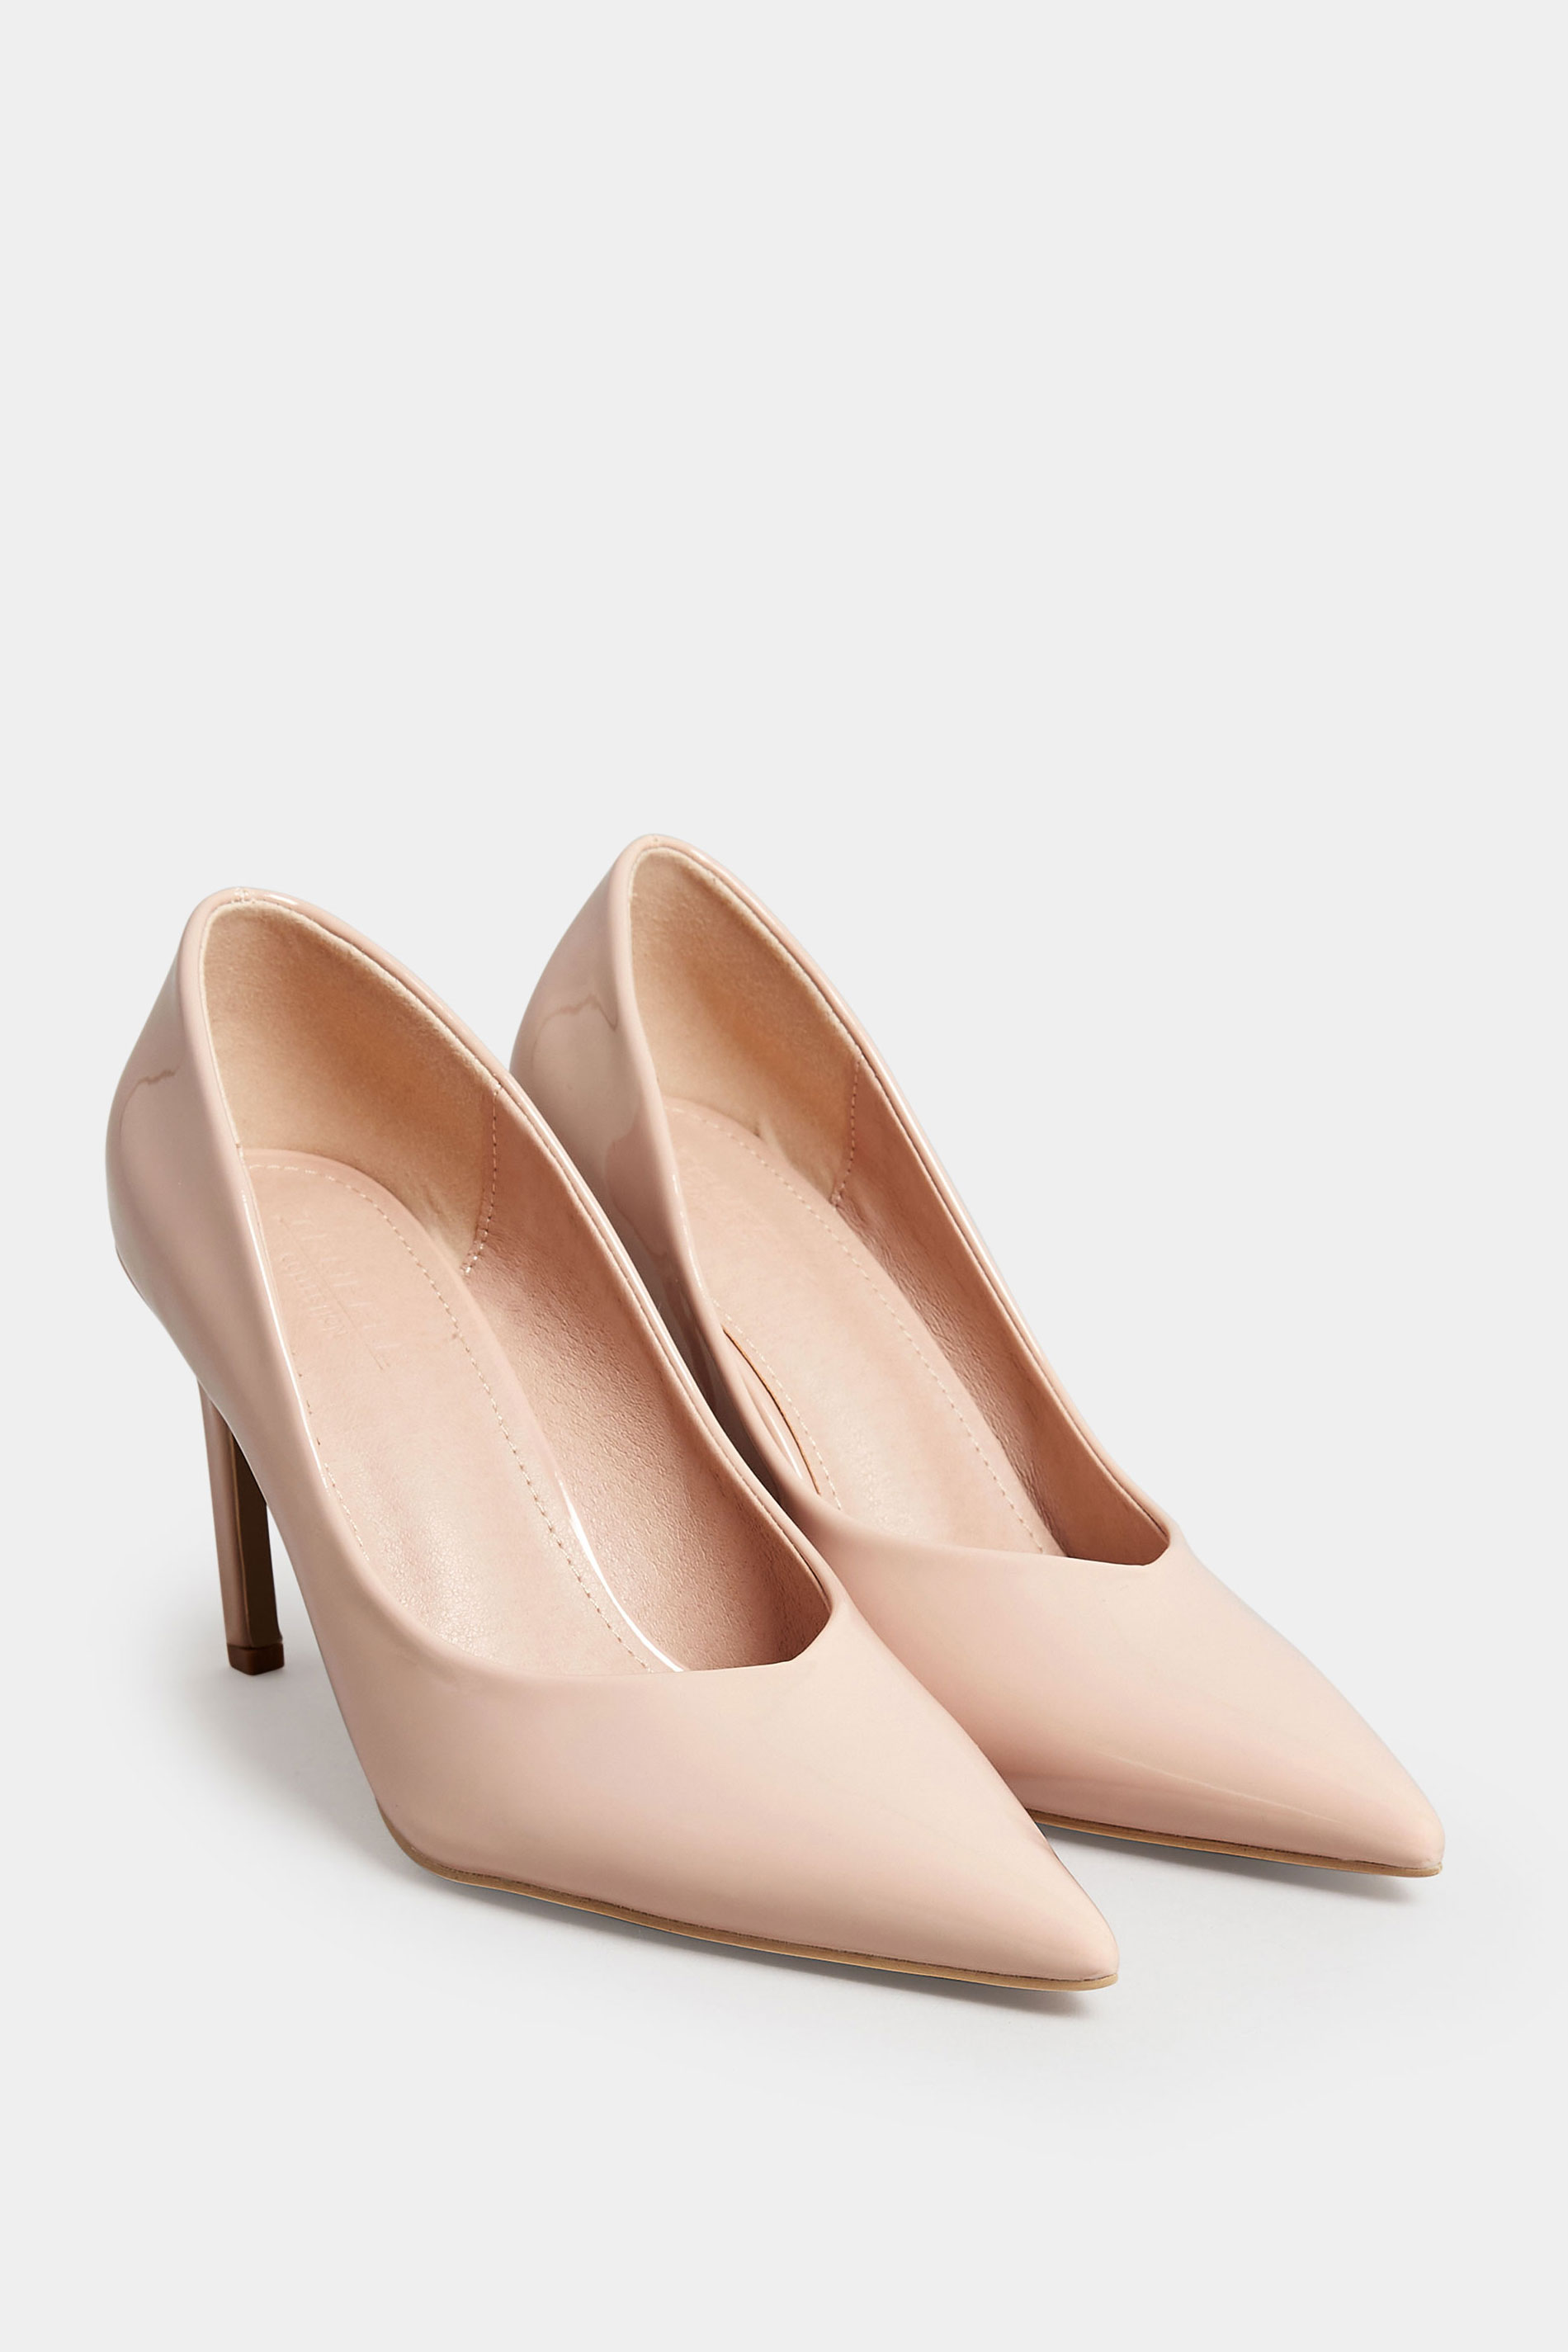 PixieGirl Nude Patent Pointed Court Shoes In Standard Fit | PixieGirl 2